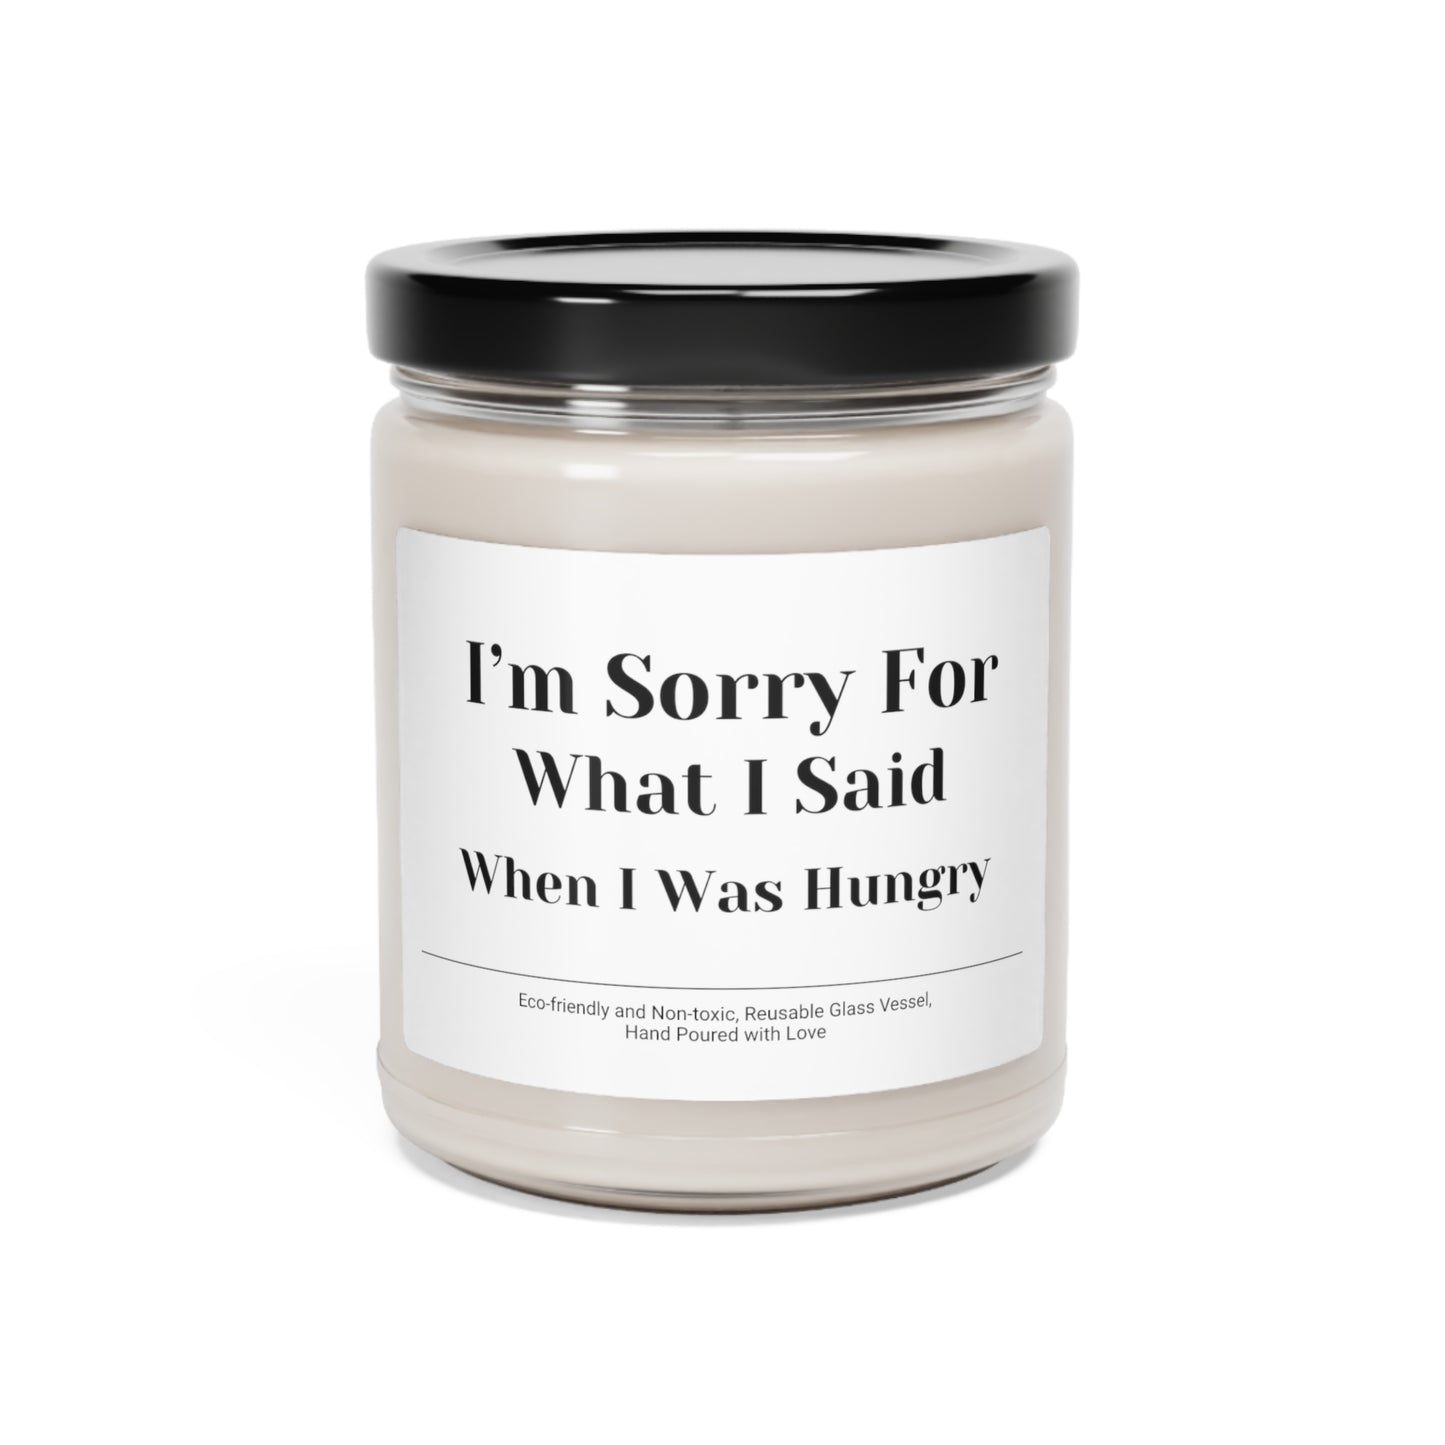 Her-13-Scented Soy Candle, 9oz